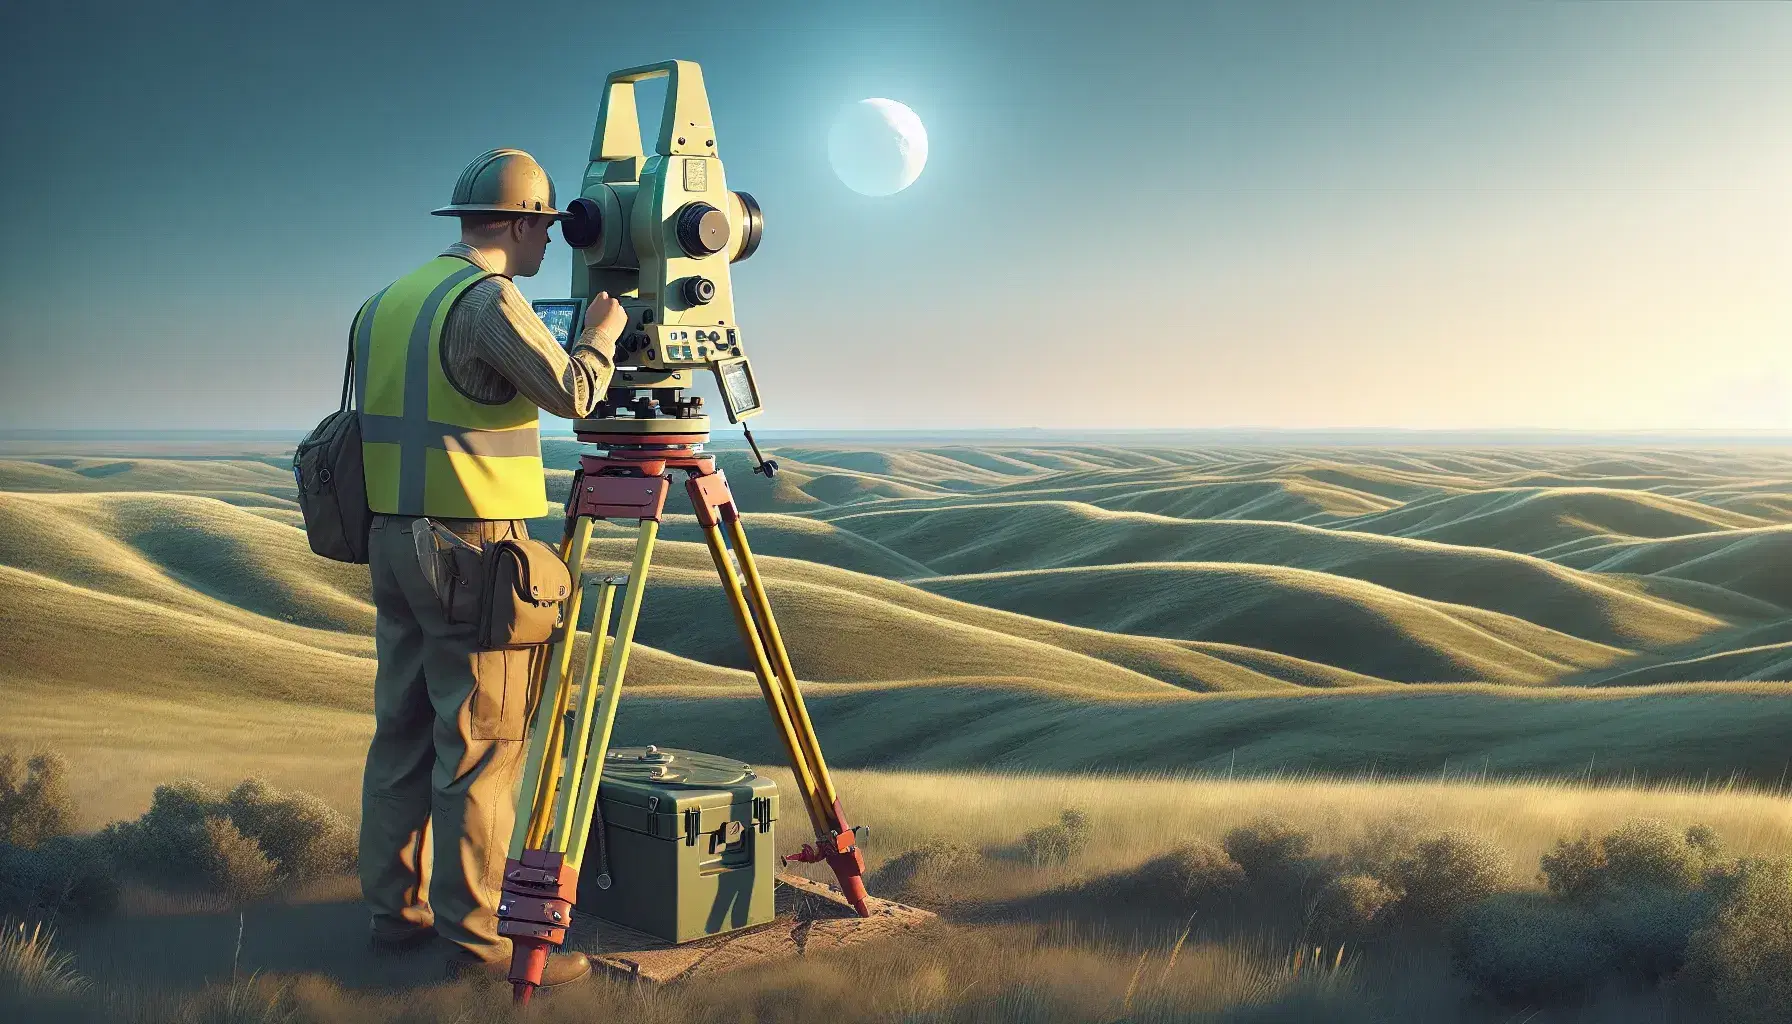 Surveyor with theodolite on tripod measures angles in grassy plain with hills in the background and blue sky with scattered clouds.